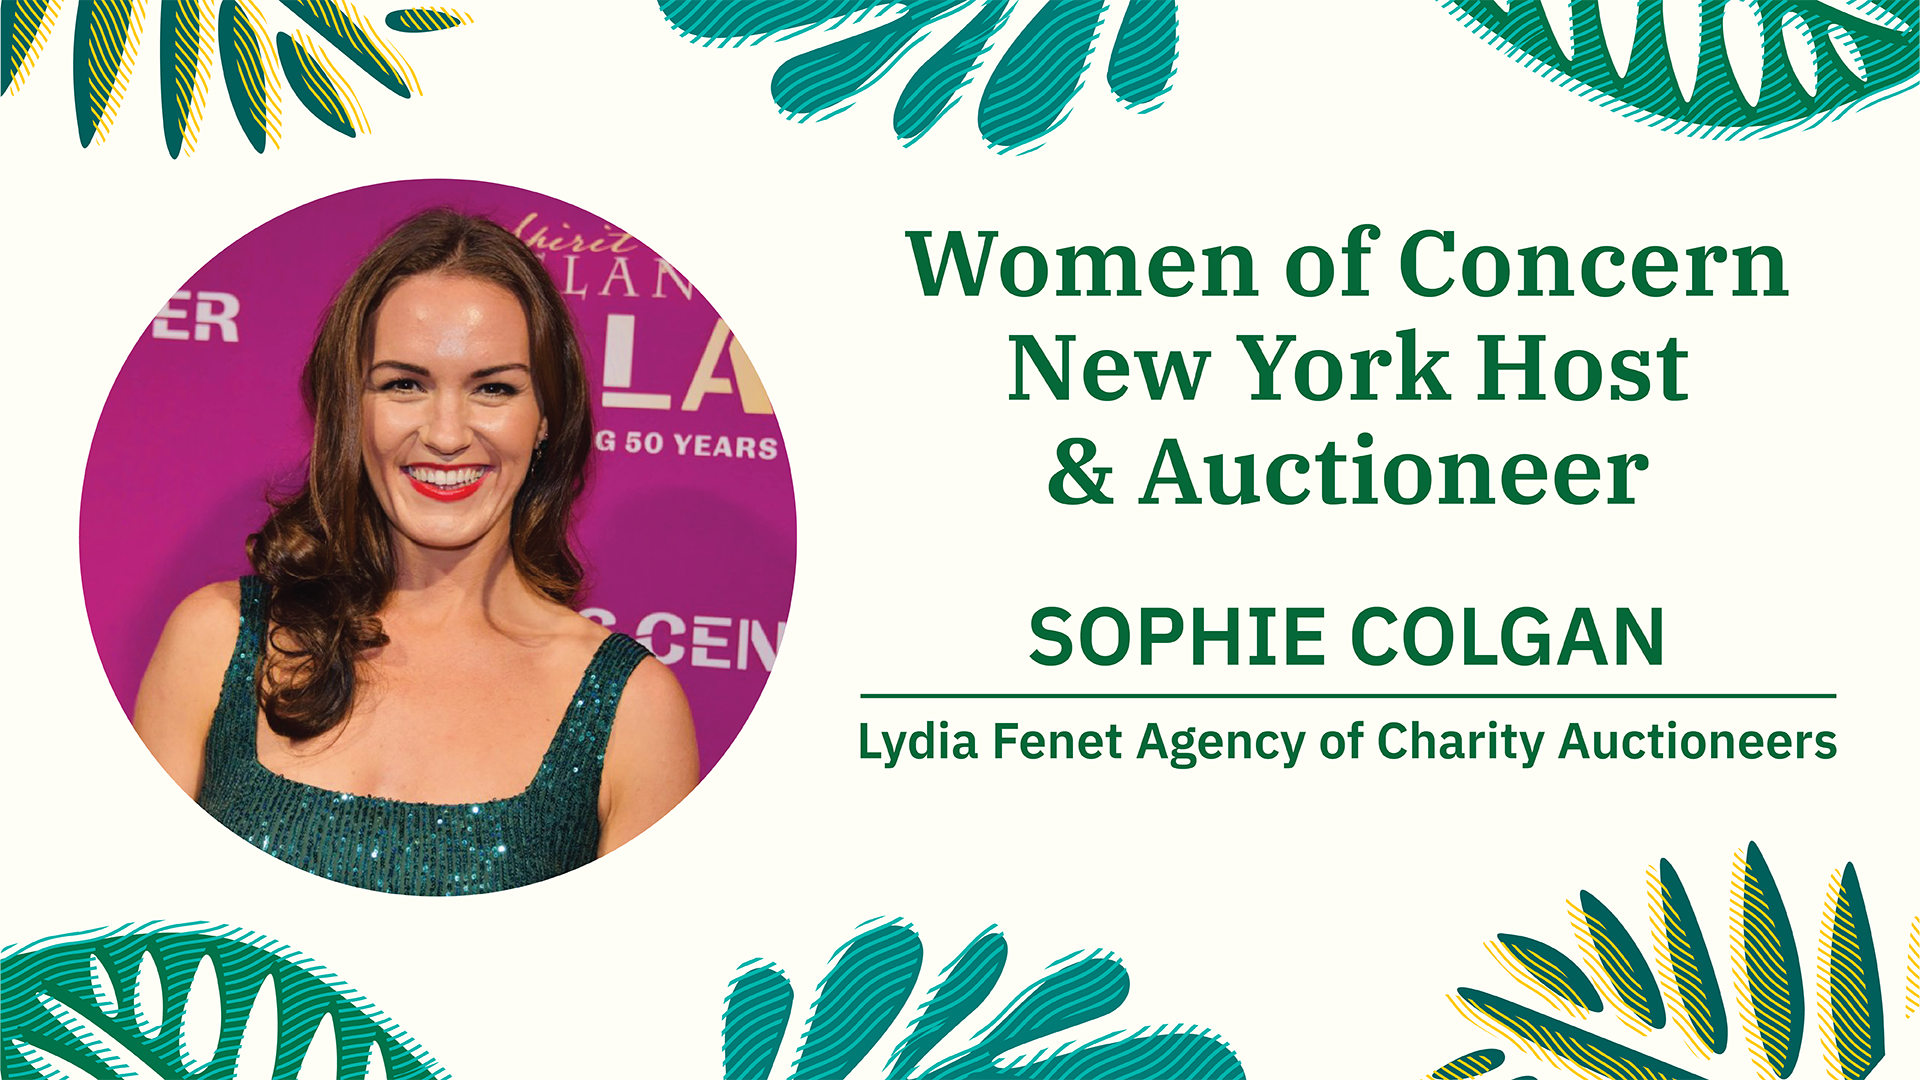 Sophie Colgan, Women of Concern New York Host and Auctioneer